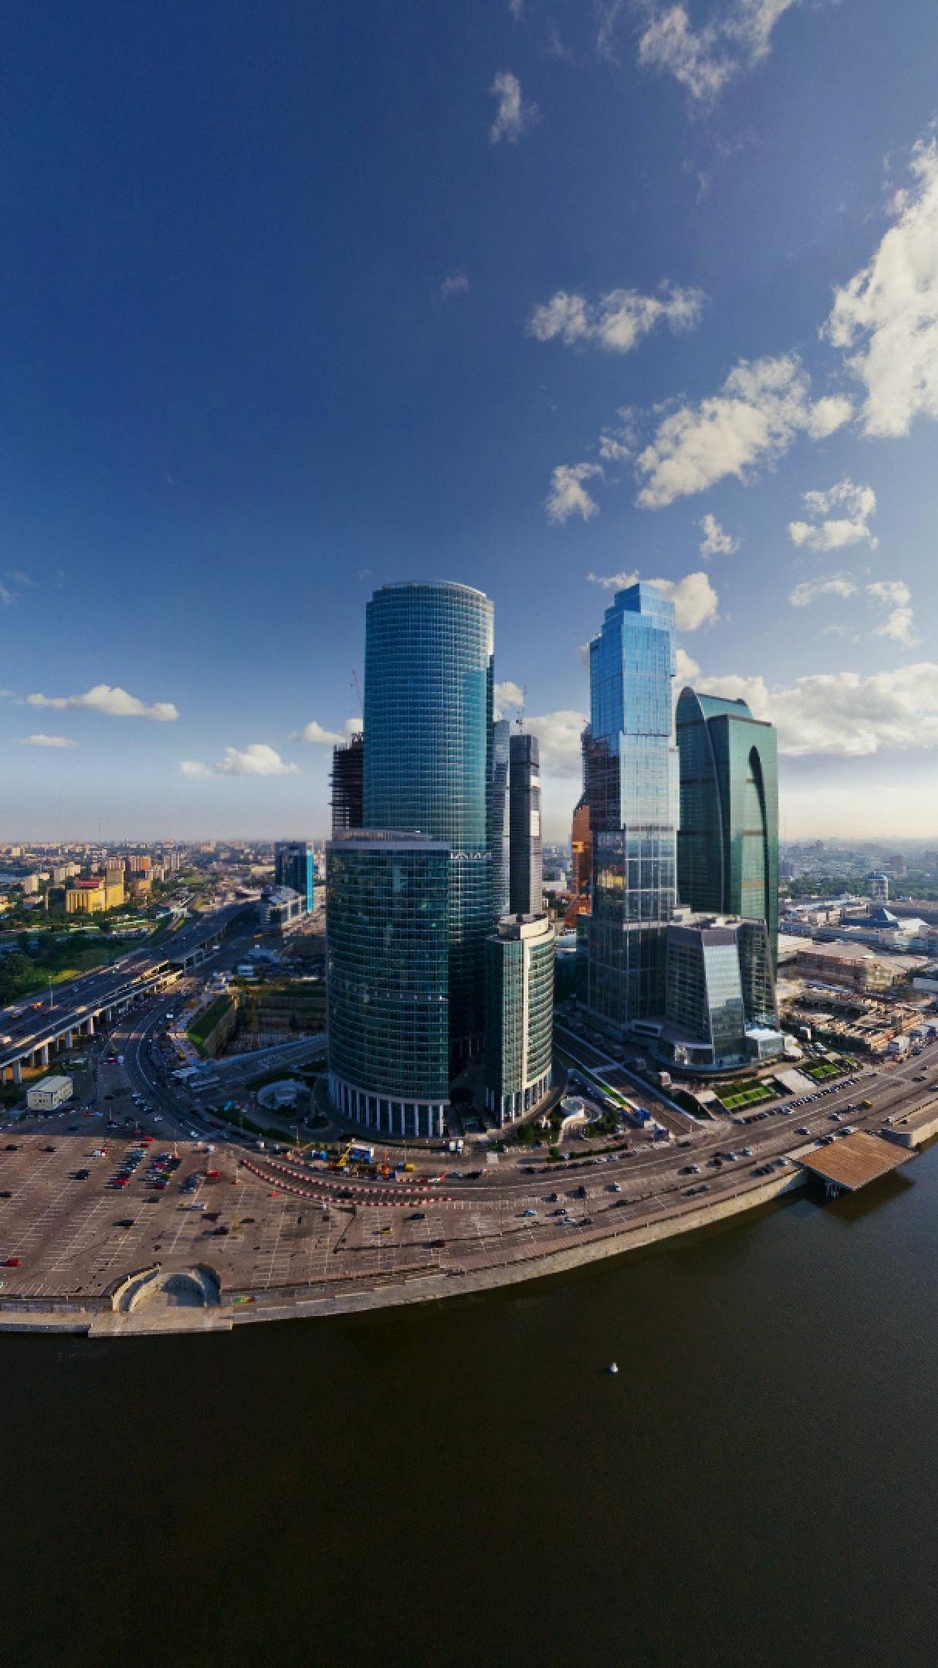 Image: Moscow, city, center, river, bridge, buildings, skyscrapers, sky, clouds, panorama